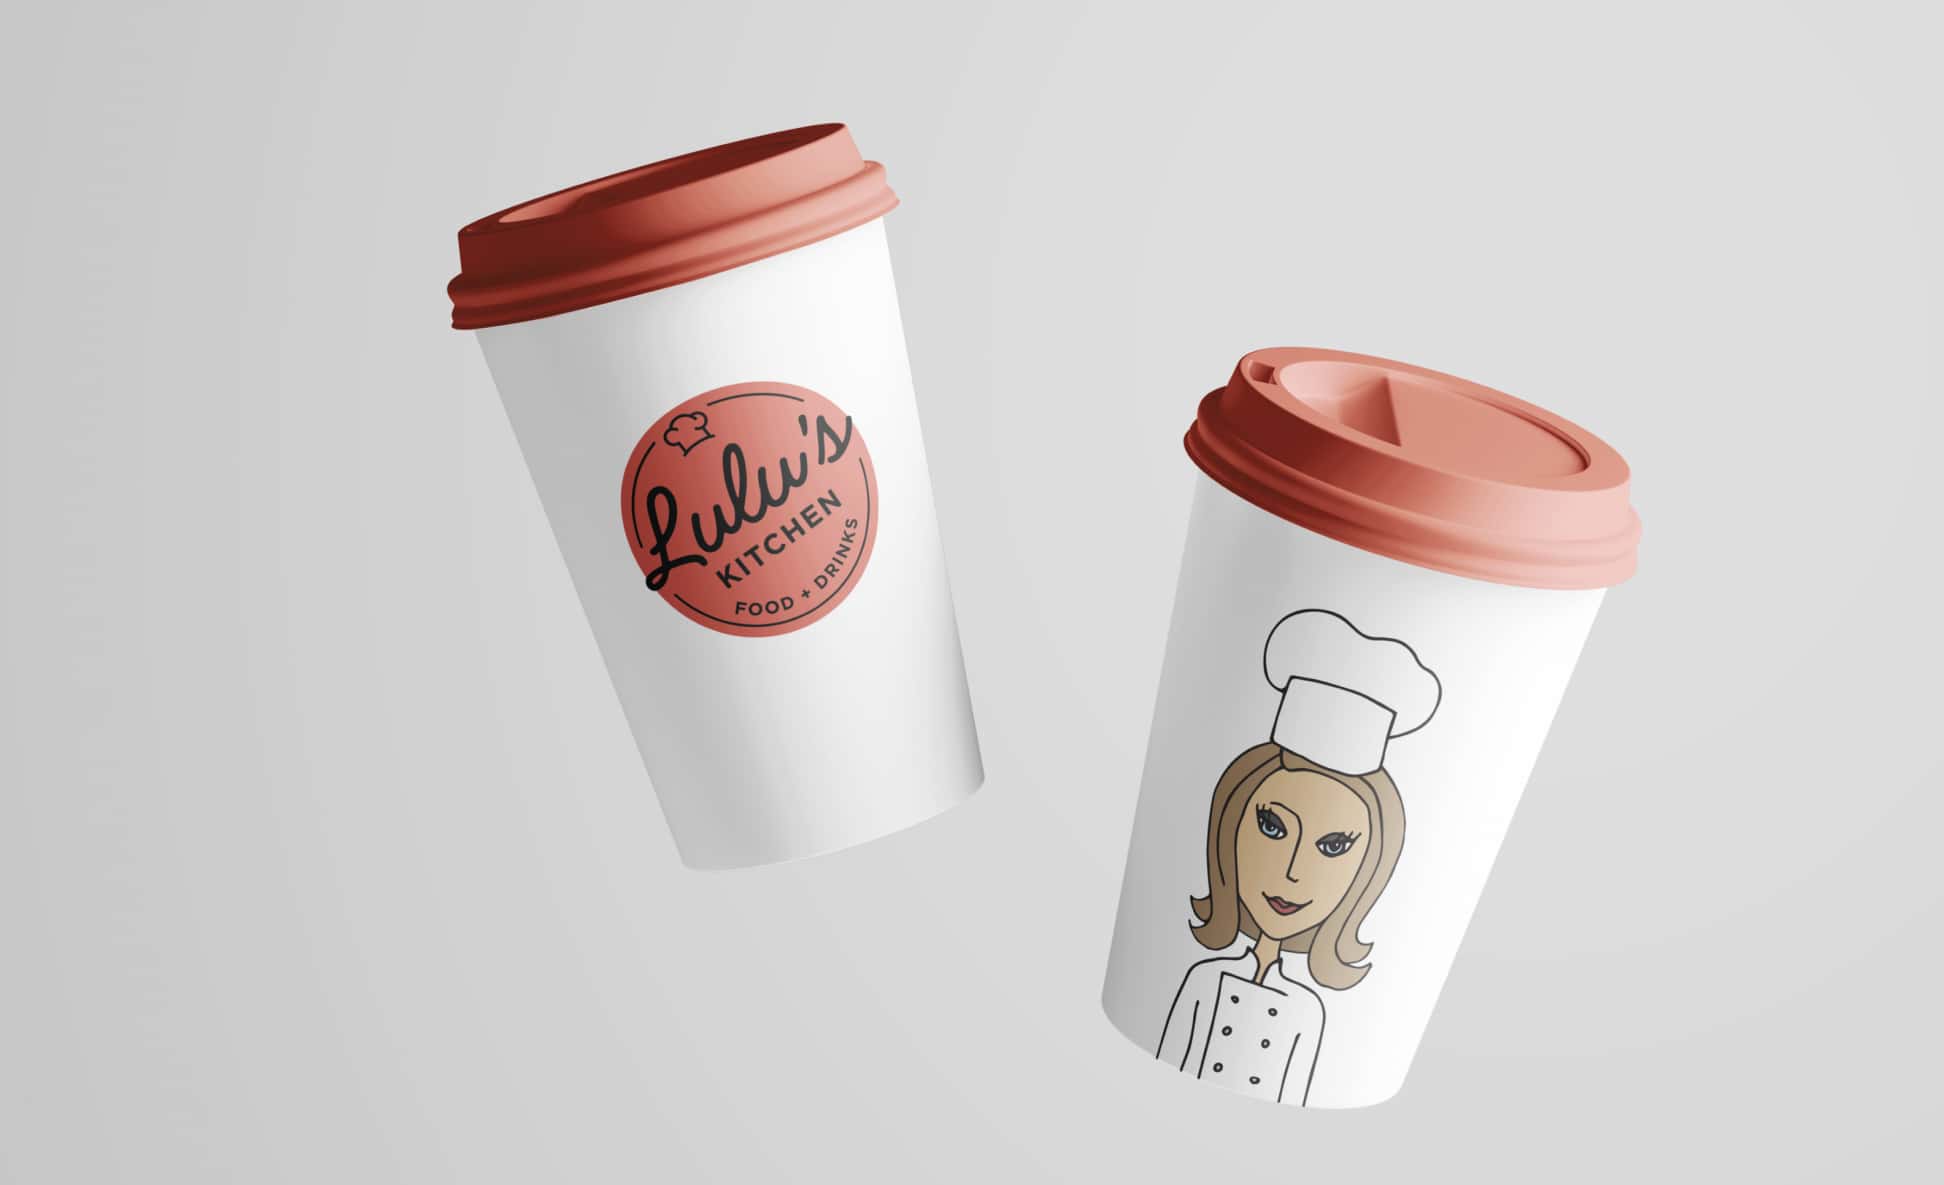 Two disposable coffee cups with lids, one featuring the logo of Lulu's Kitchen and the other adorned with an illustration of a female chef, representing the brand's identity.